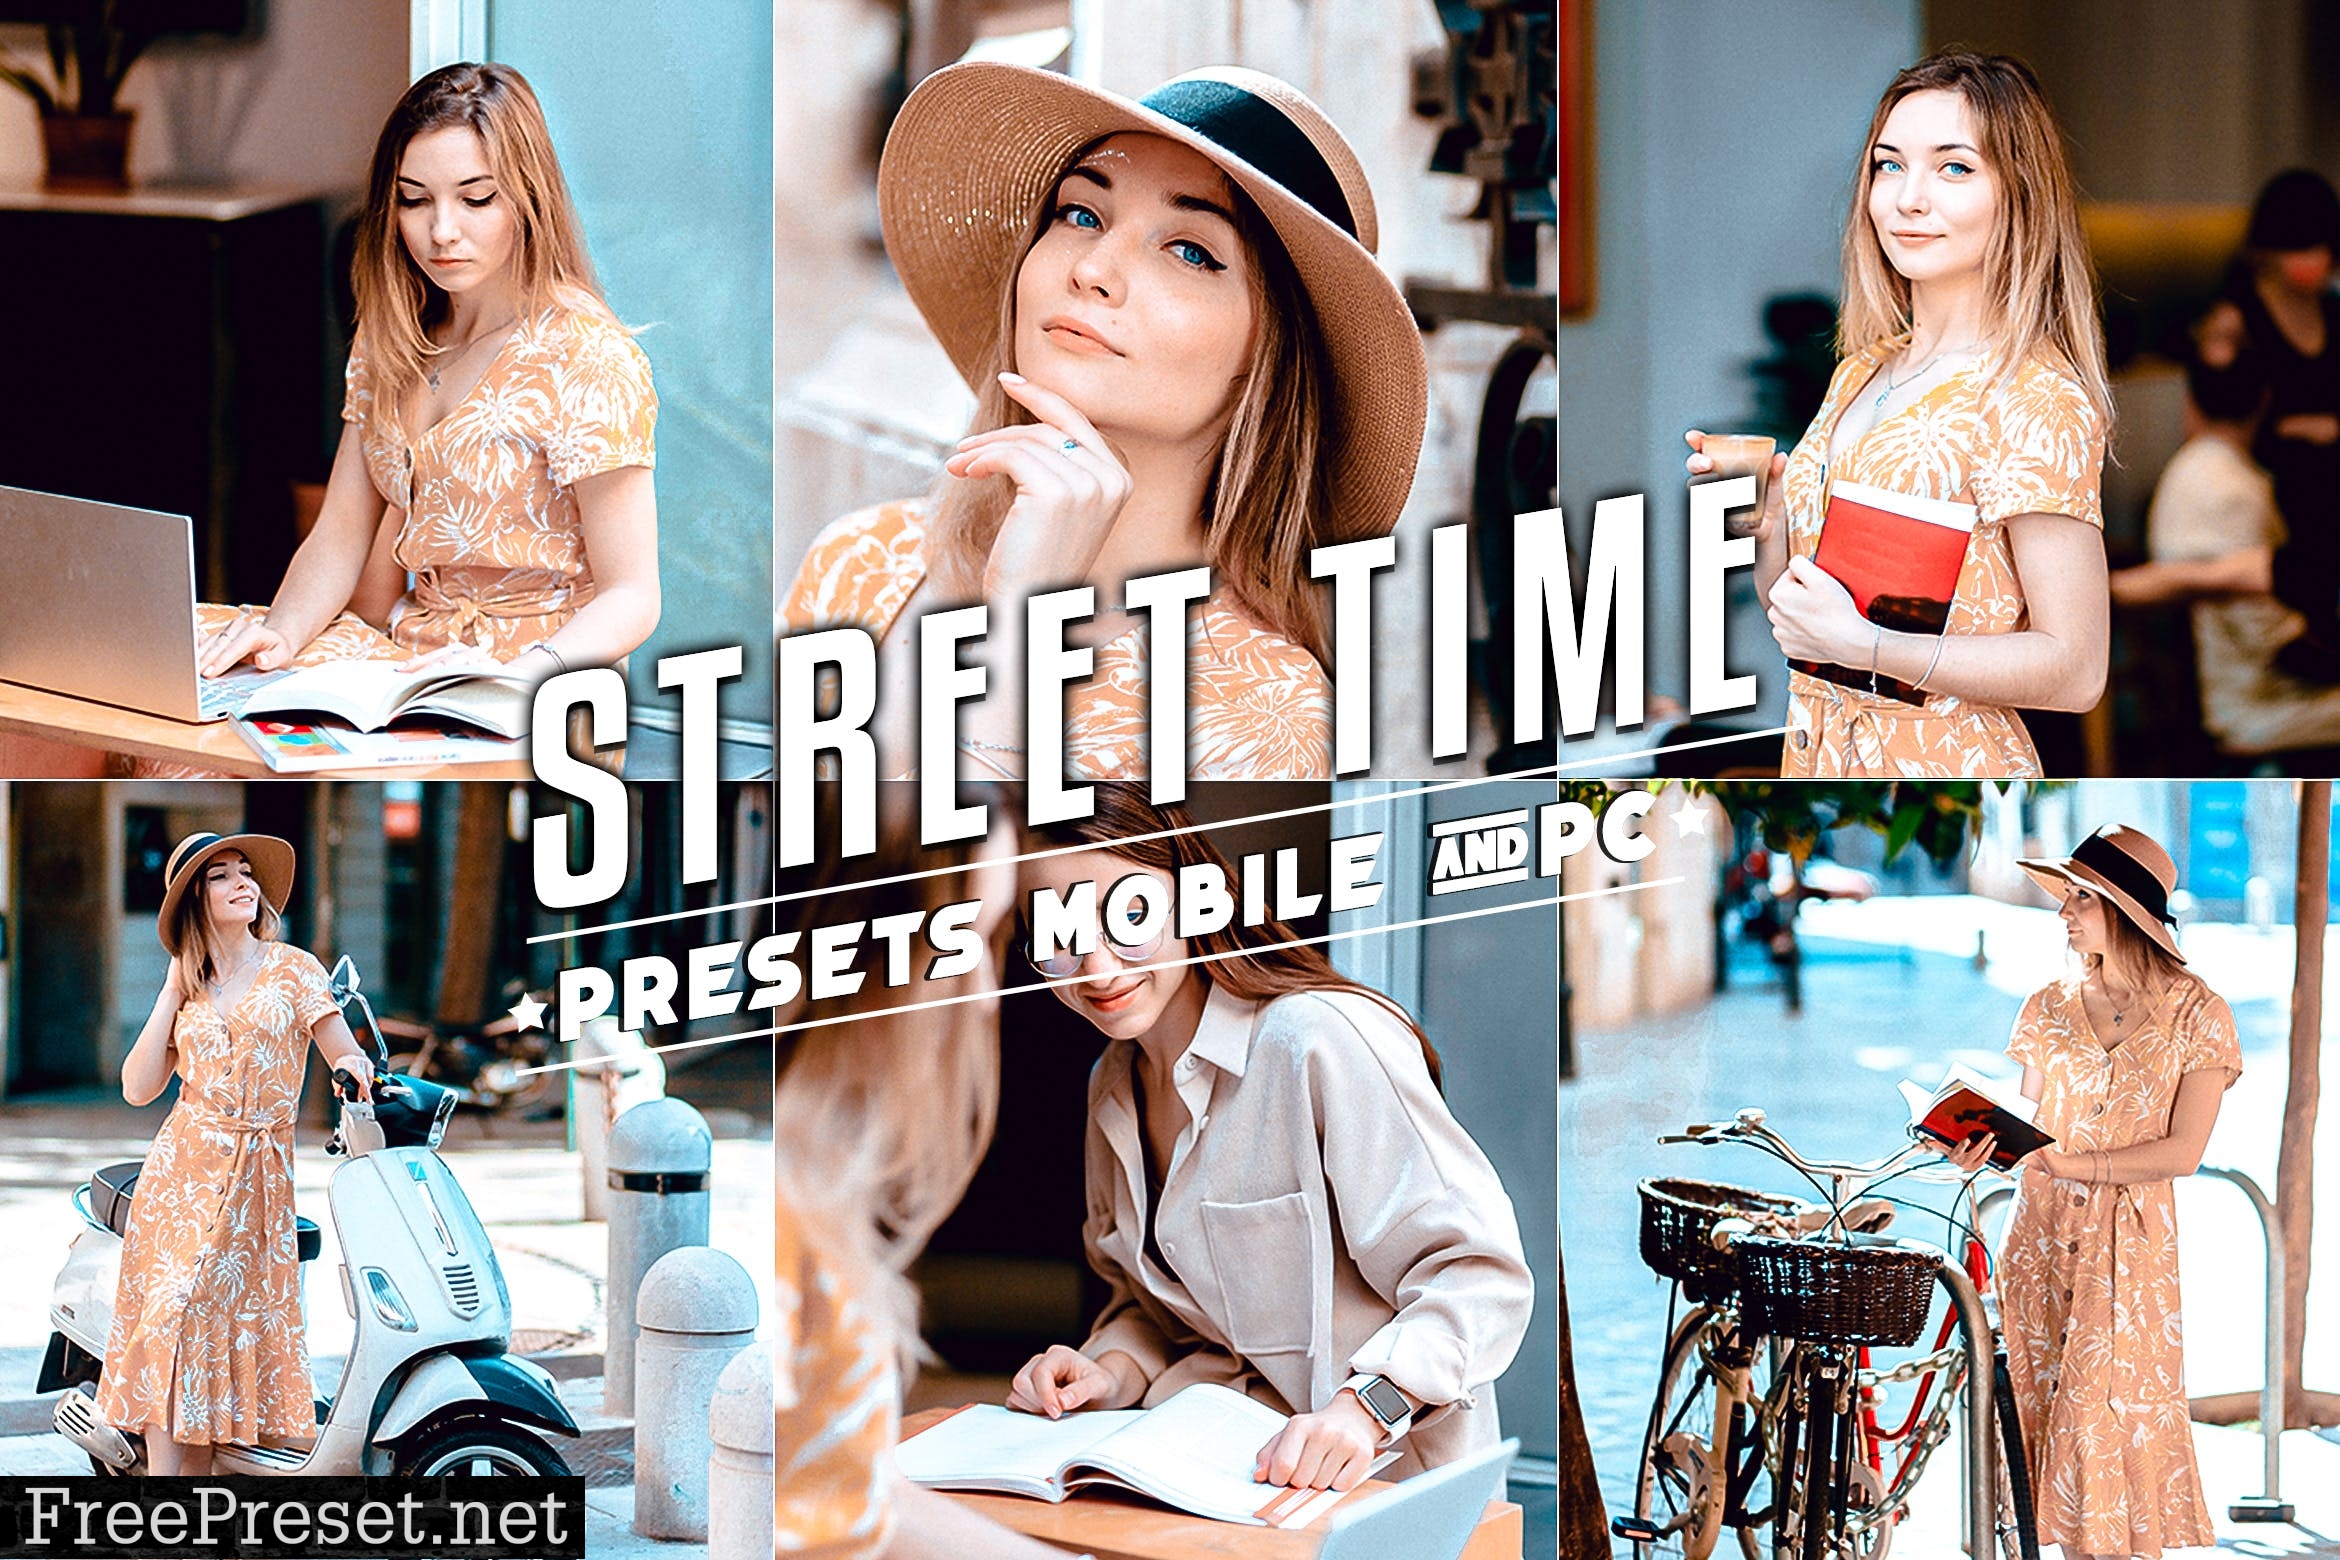 Street Time Presets